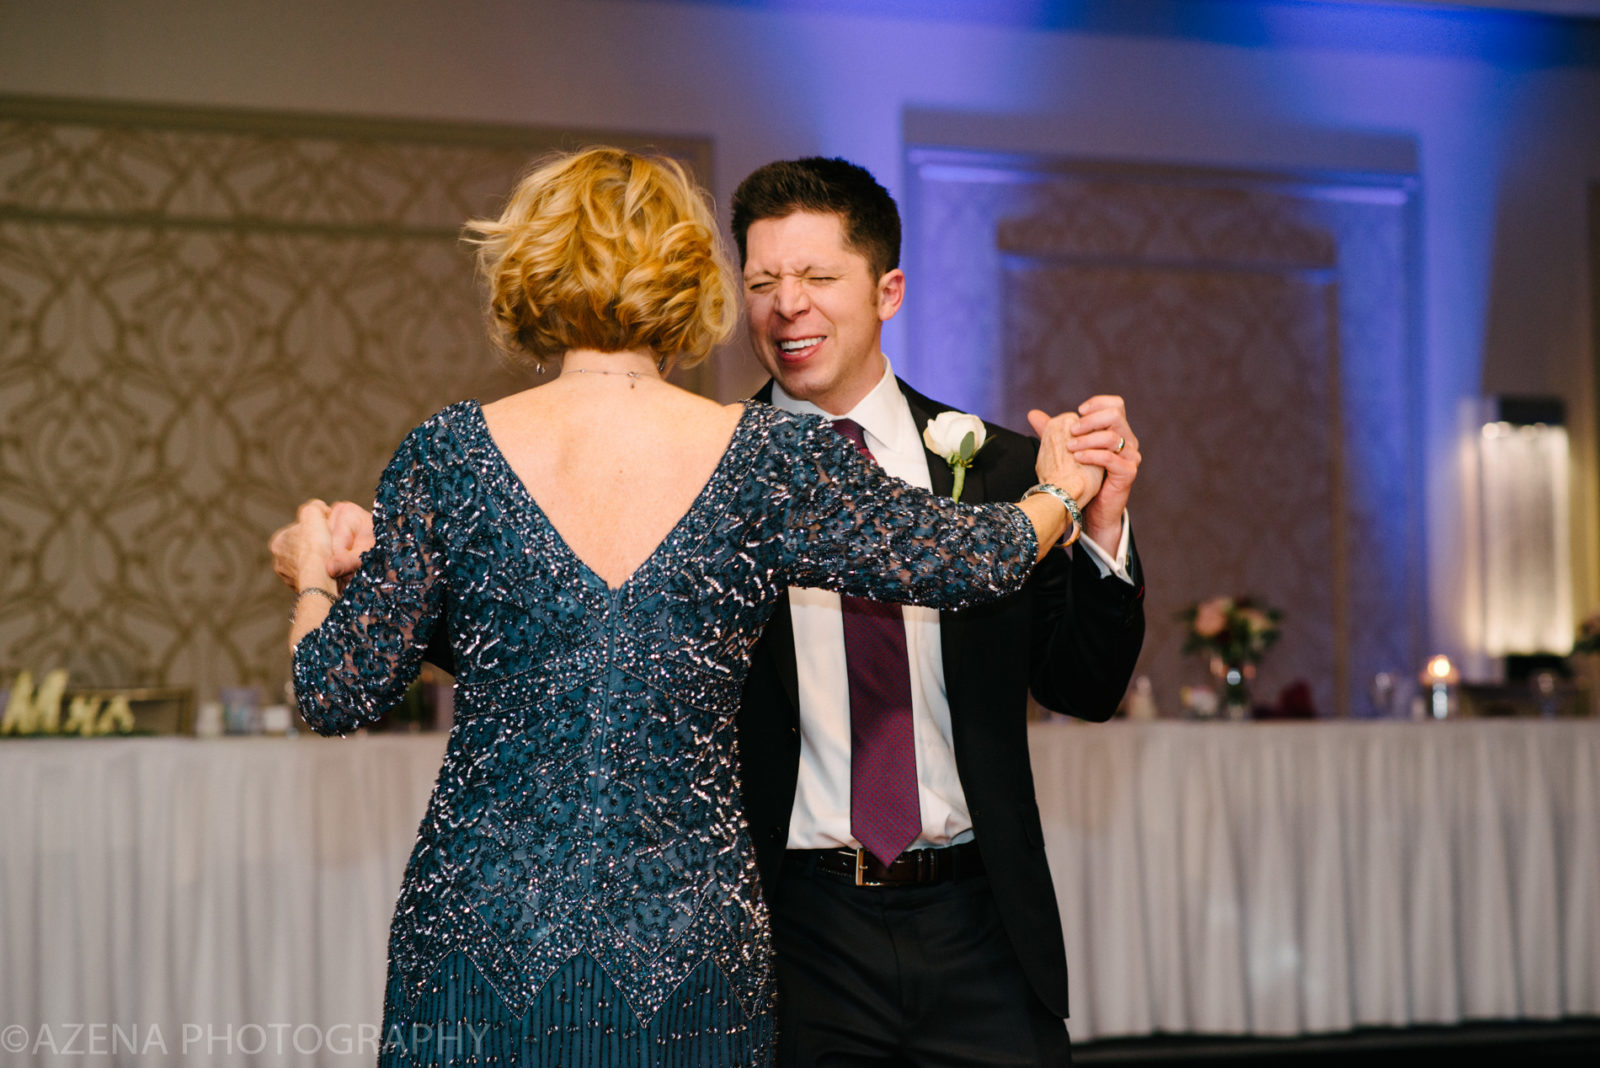 Mother and Son dance at wedding